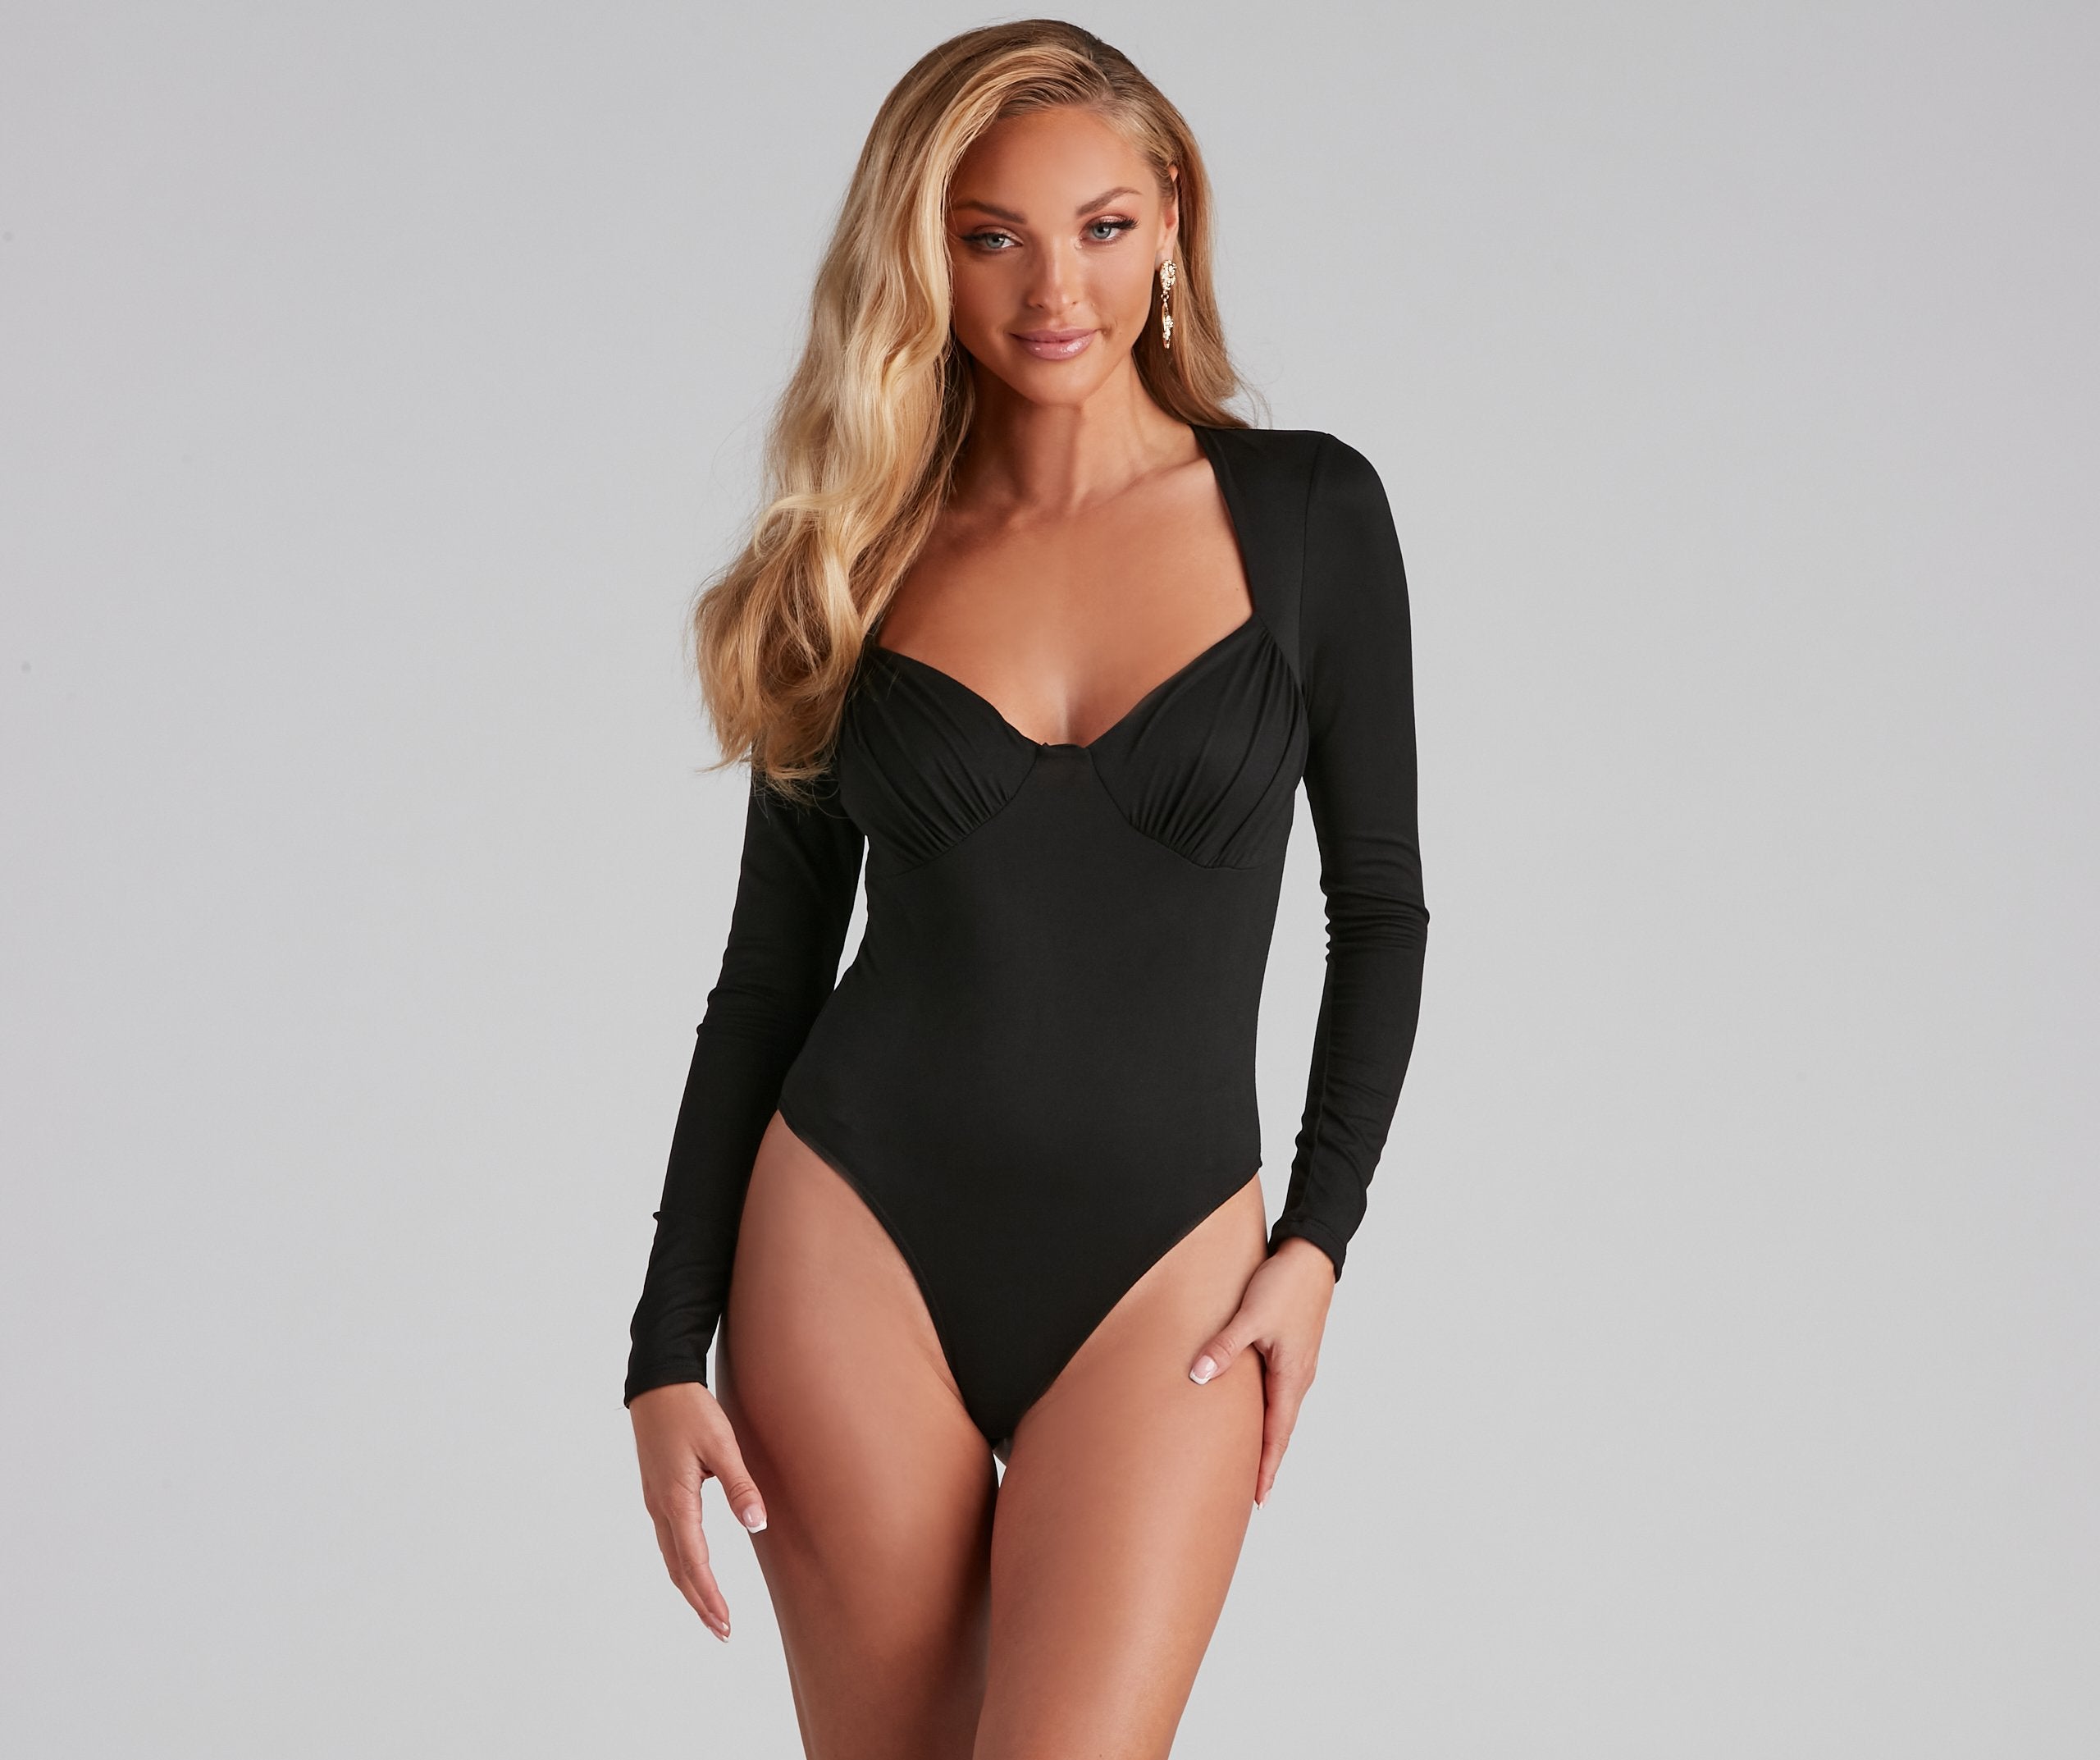 Simple And Chic Sweetheart Bodysuit